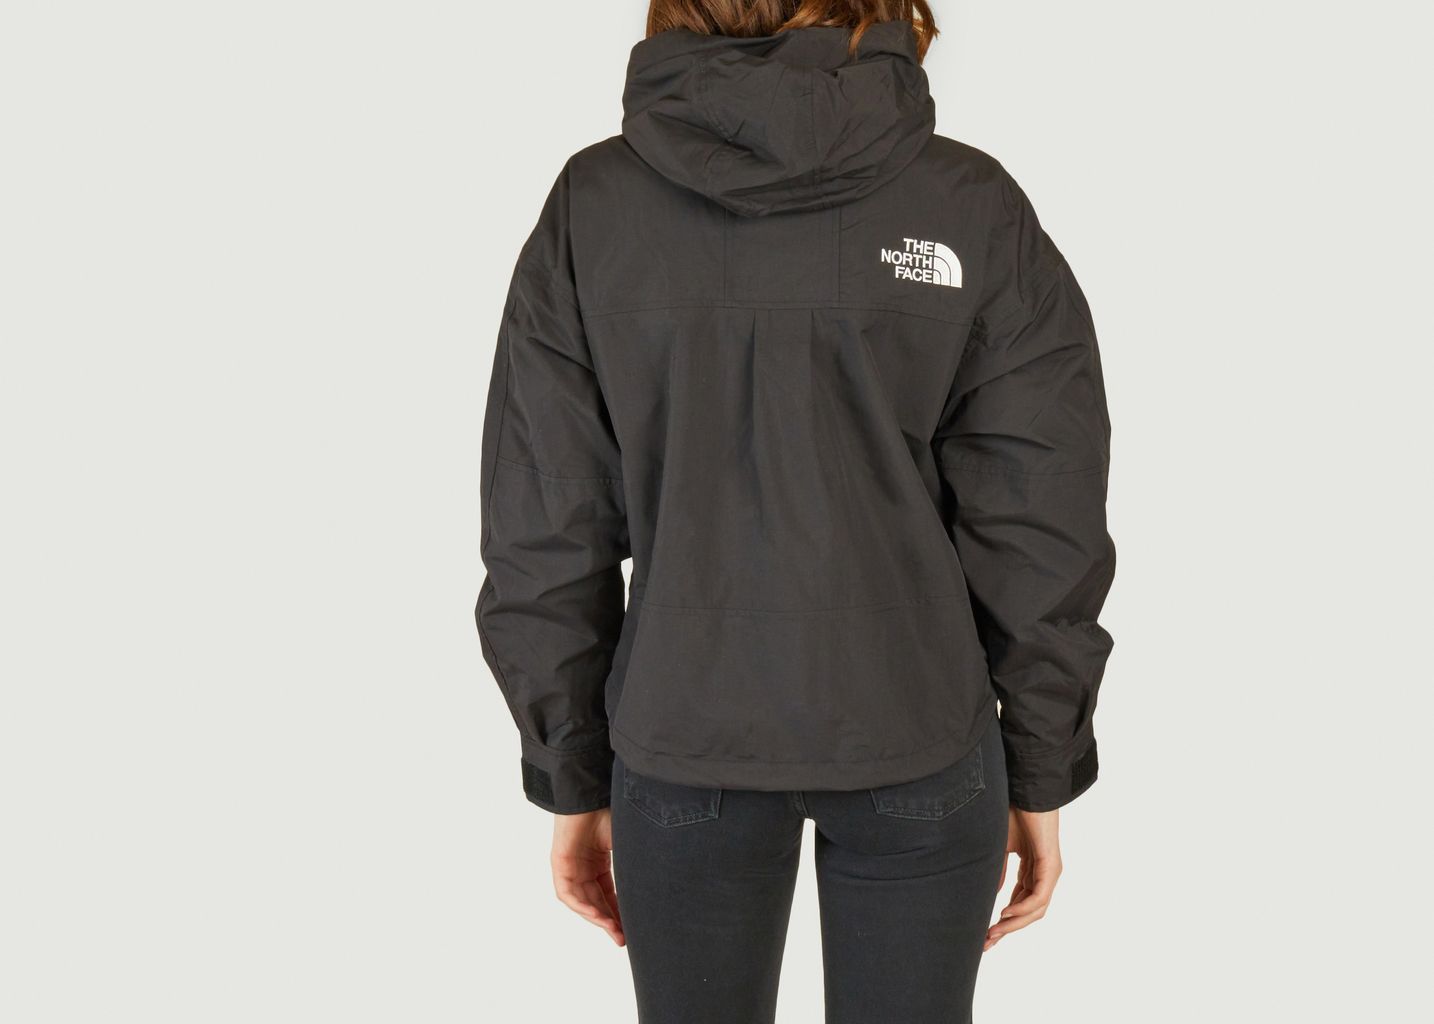 Reign On Jacket - The North Face